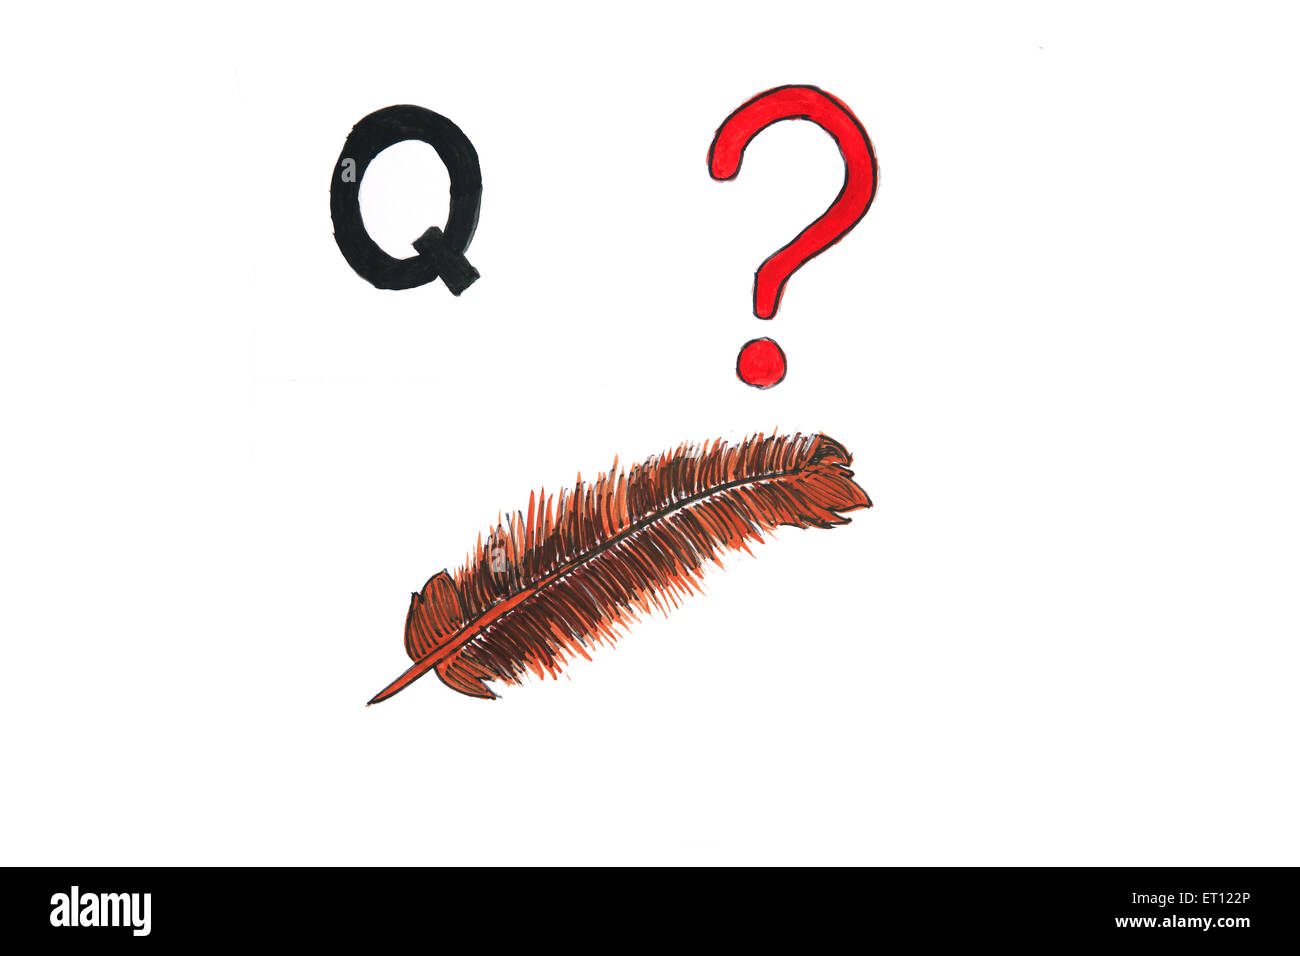 q for question mark, q for quill Stock Photo